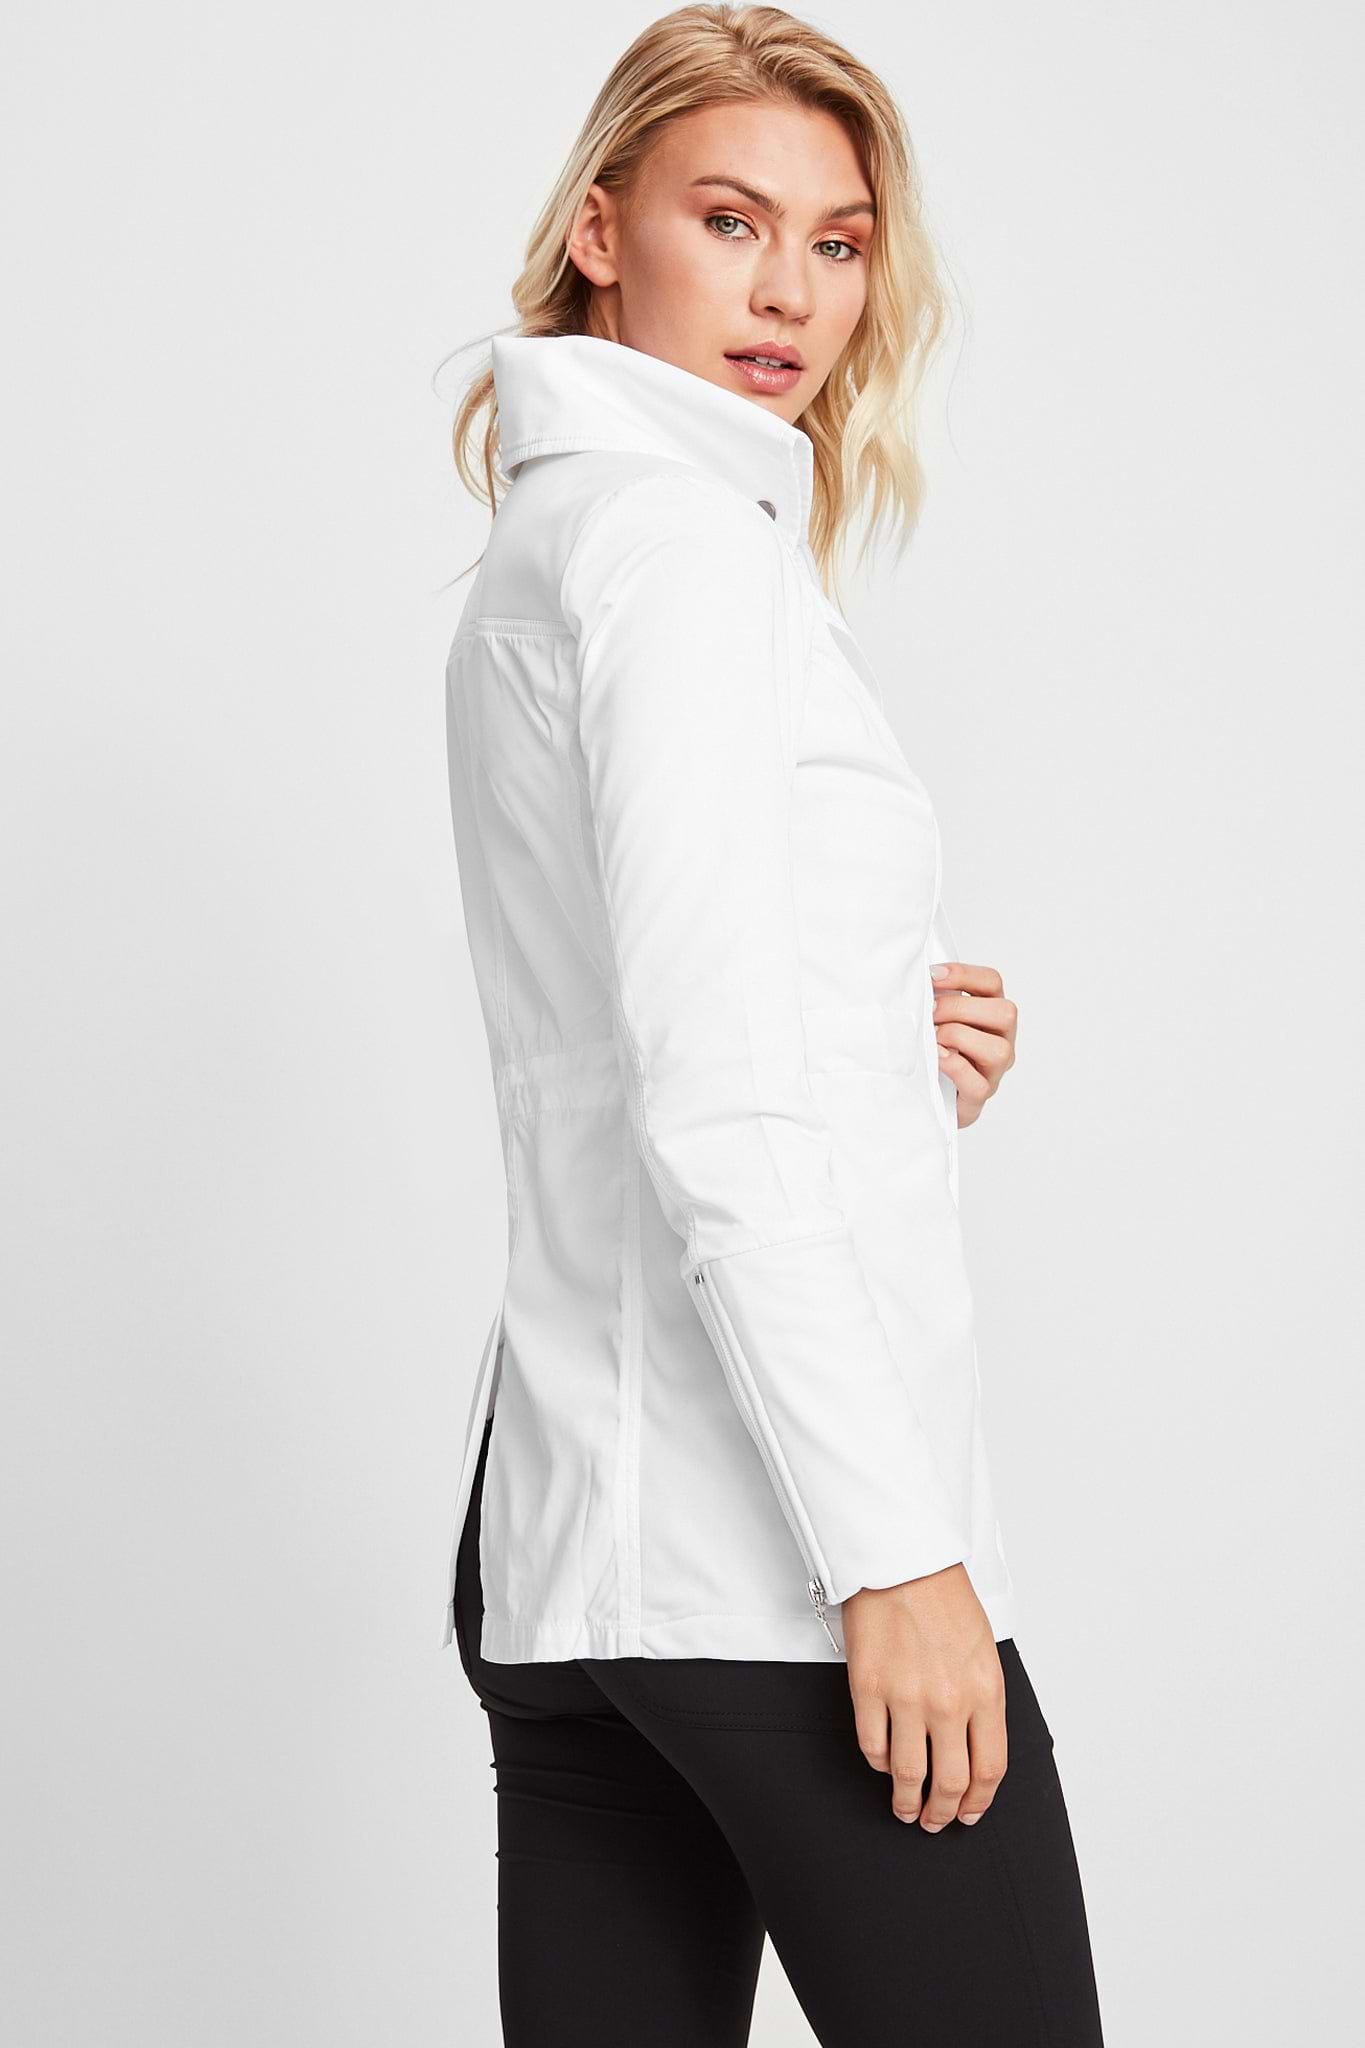 The Best Travel Jacket. Woman Showing the Side Profile of a Travel City Slick Jacket in White